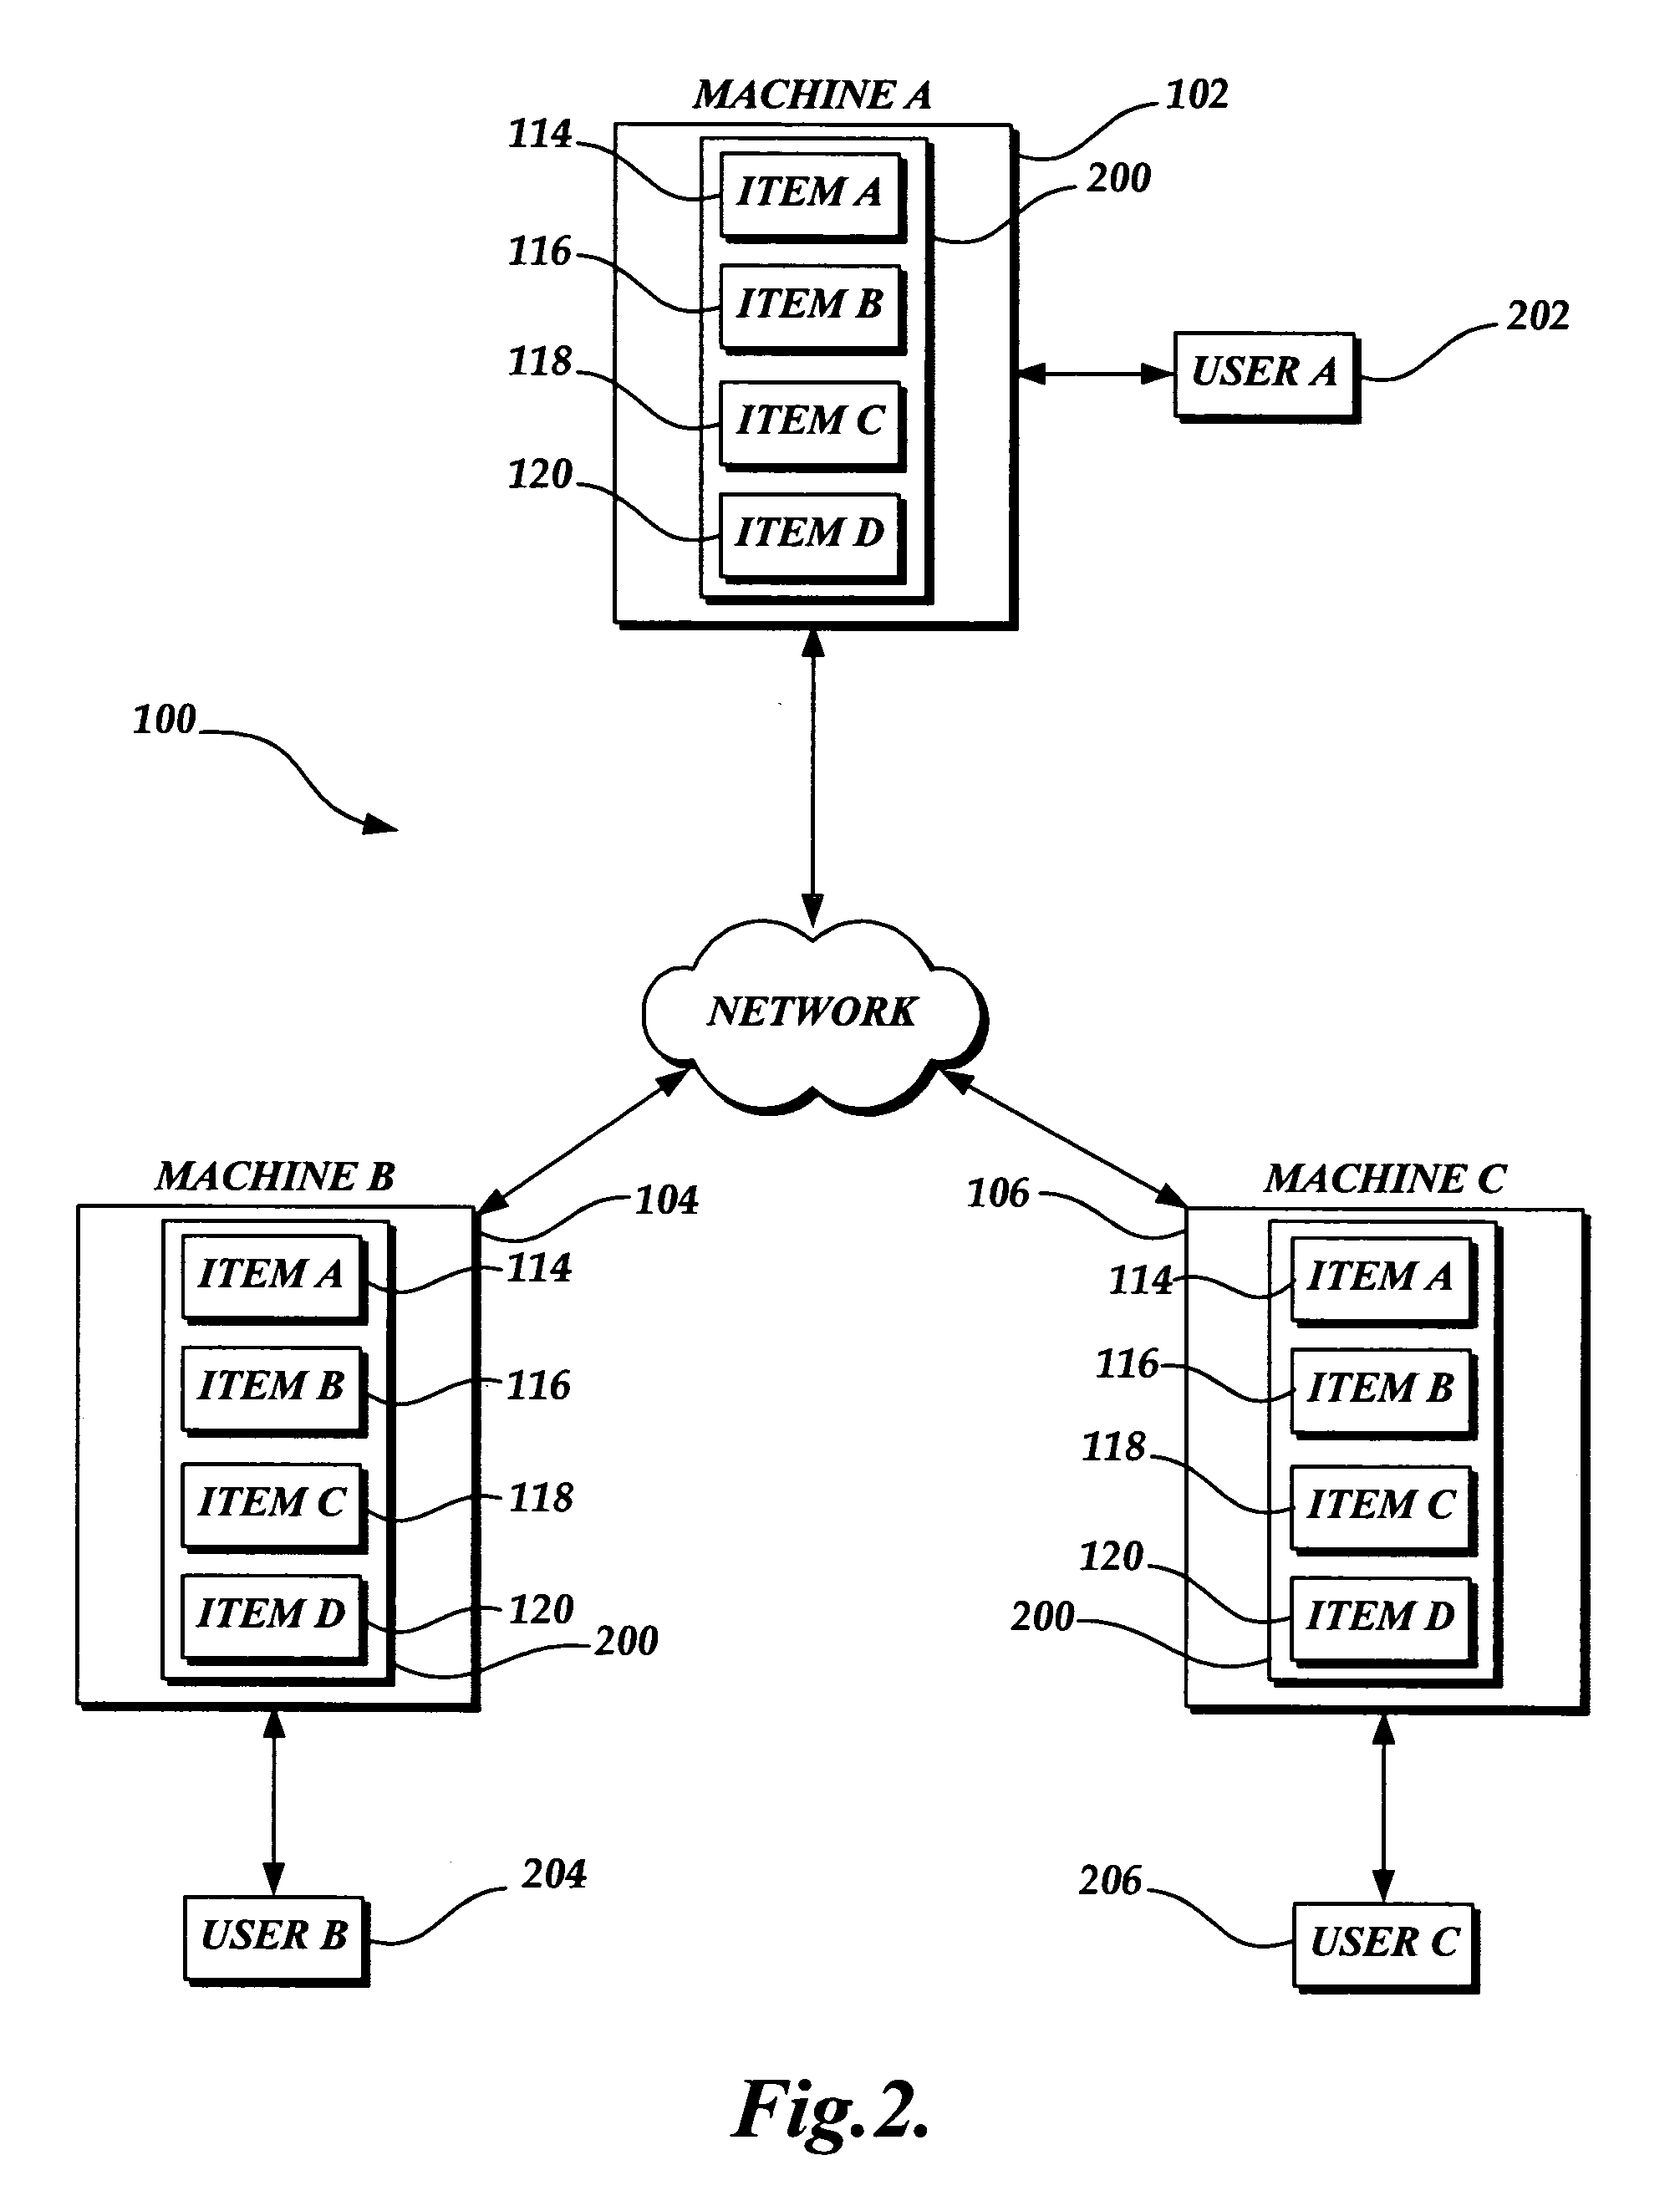 System and method for generating a consistent user name-space on networked devices